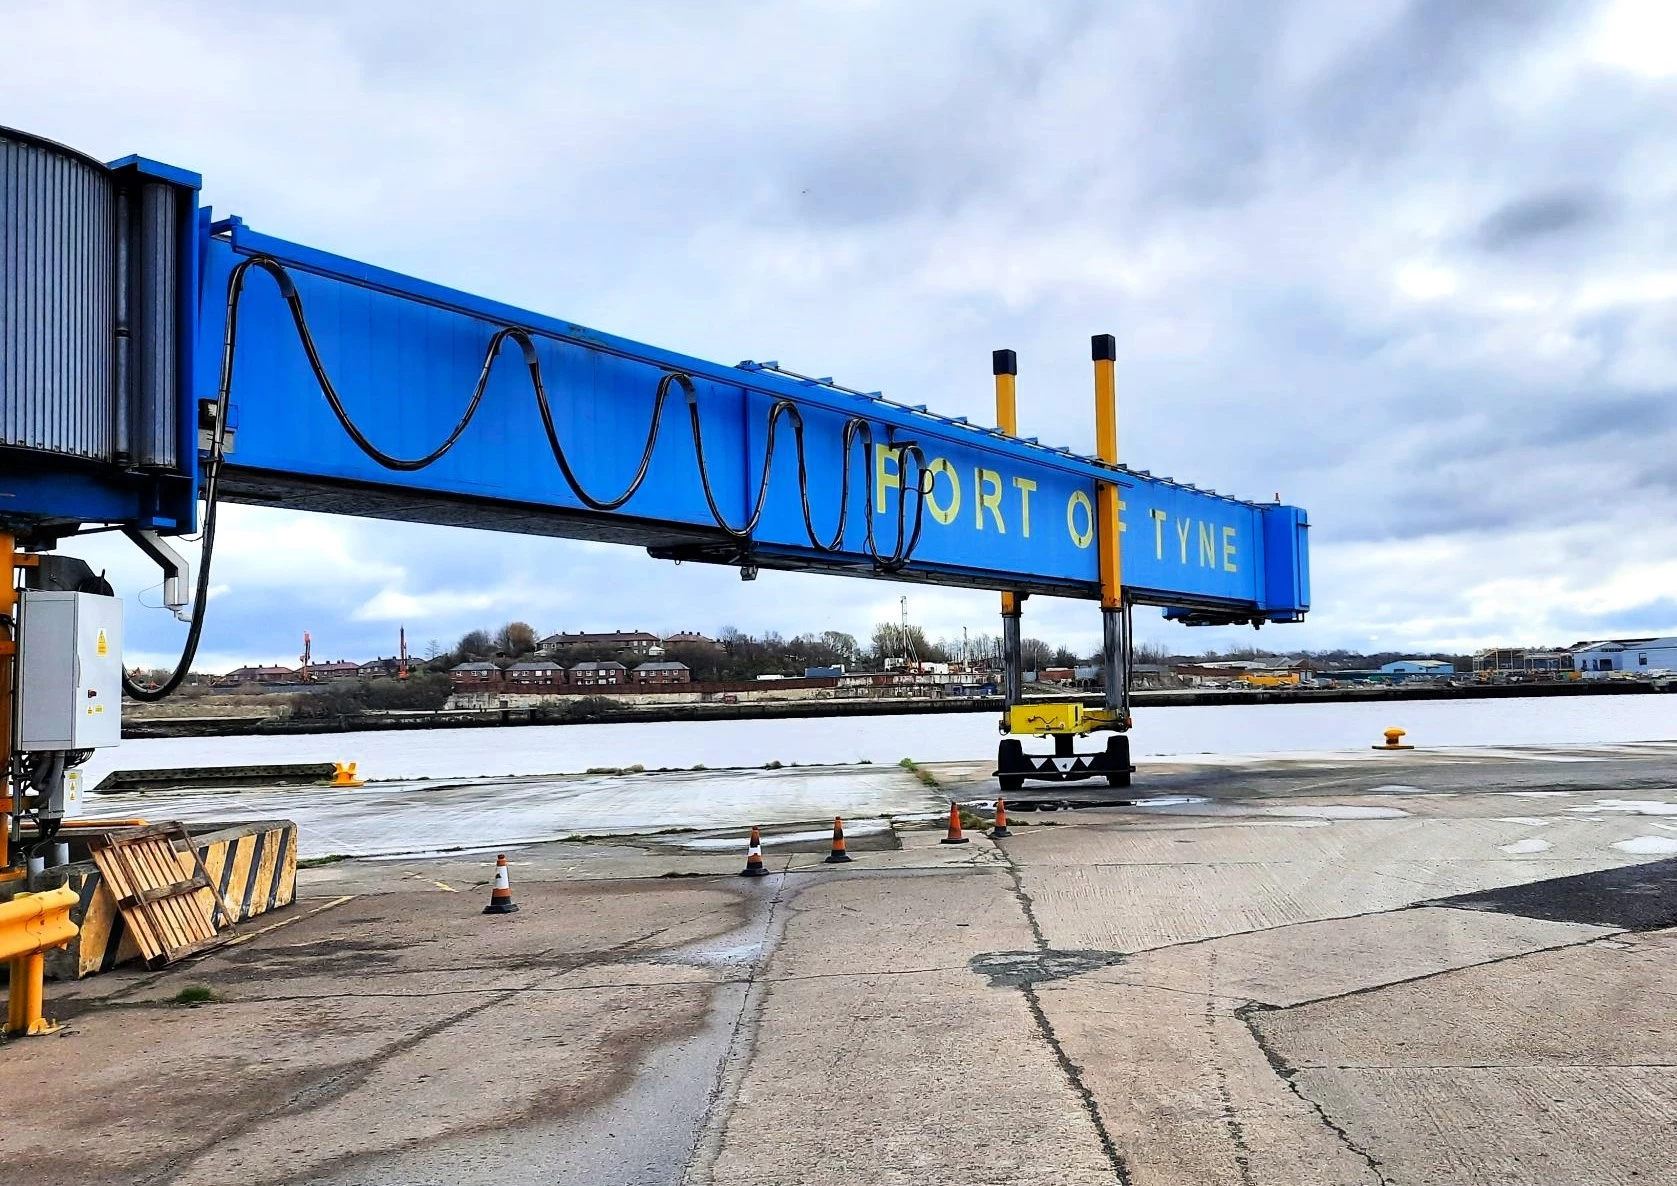 Port of Tyne trialled the solar energy system developed by Grafmarine 